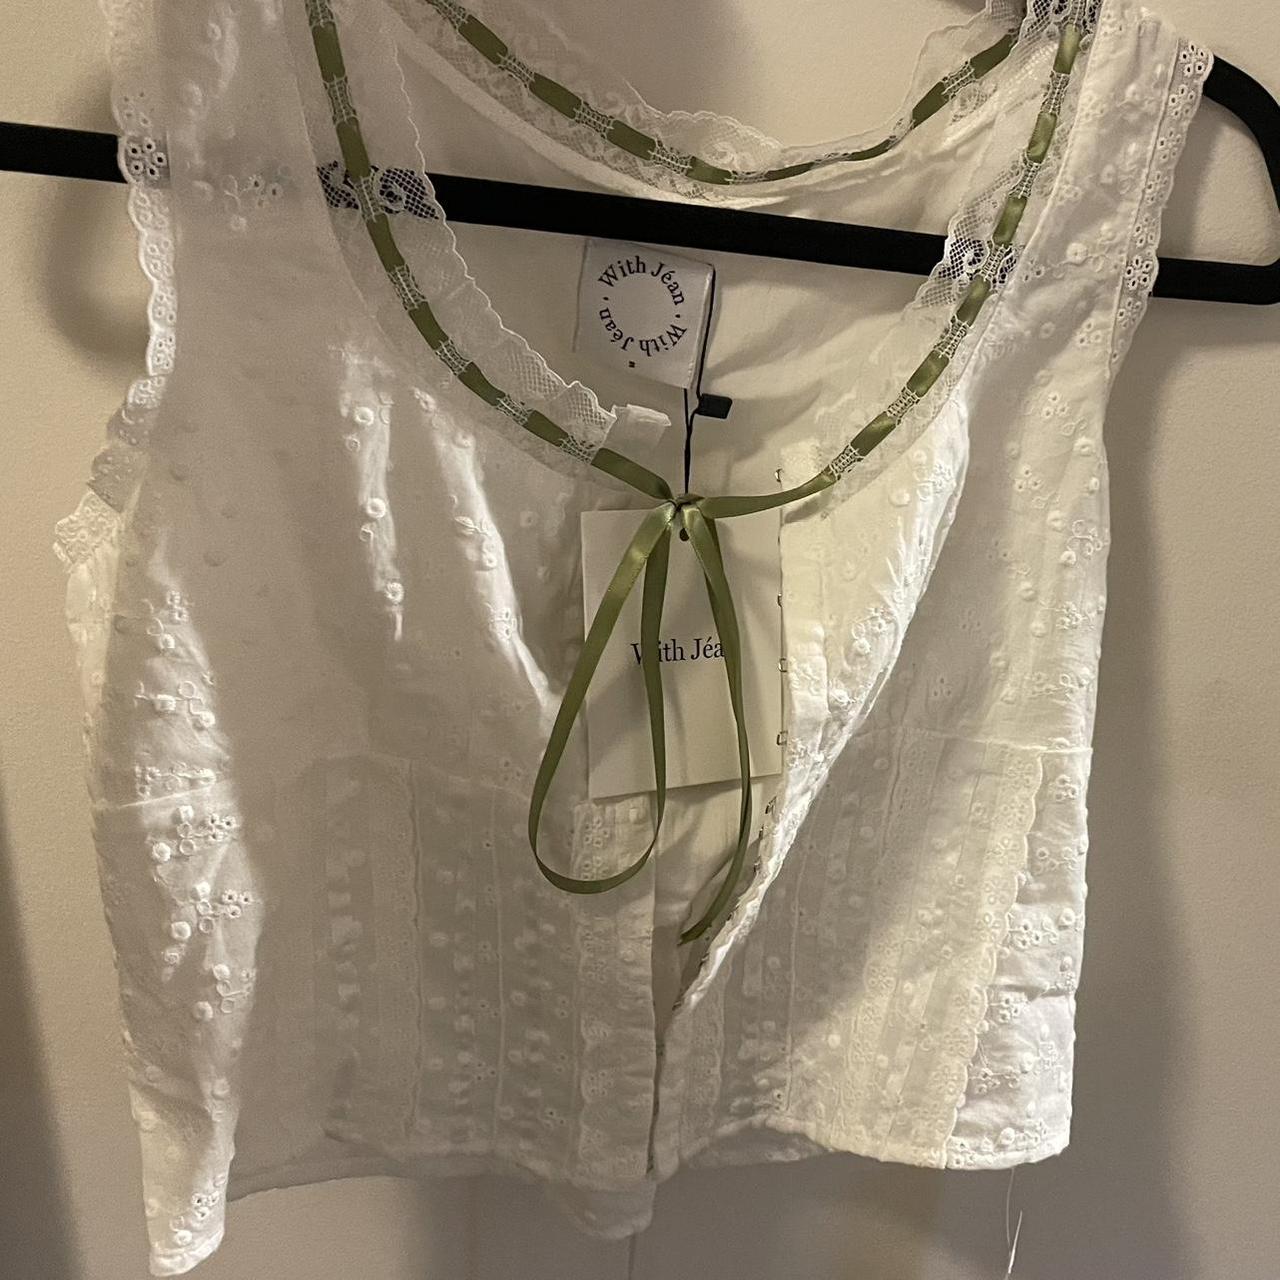 With Jéan Women's White and Green Blouse (4)